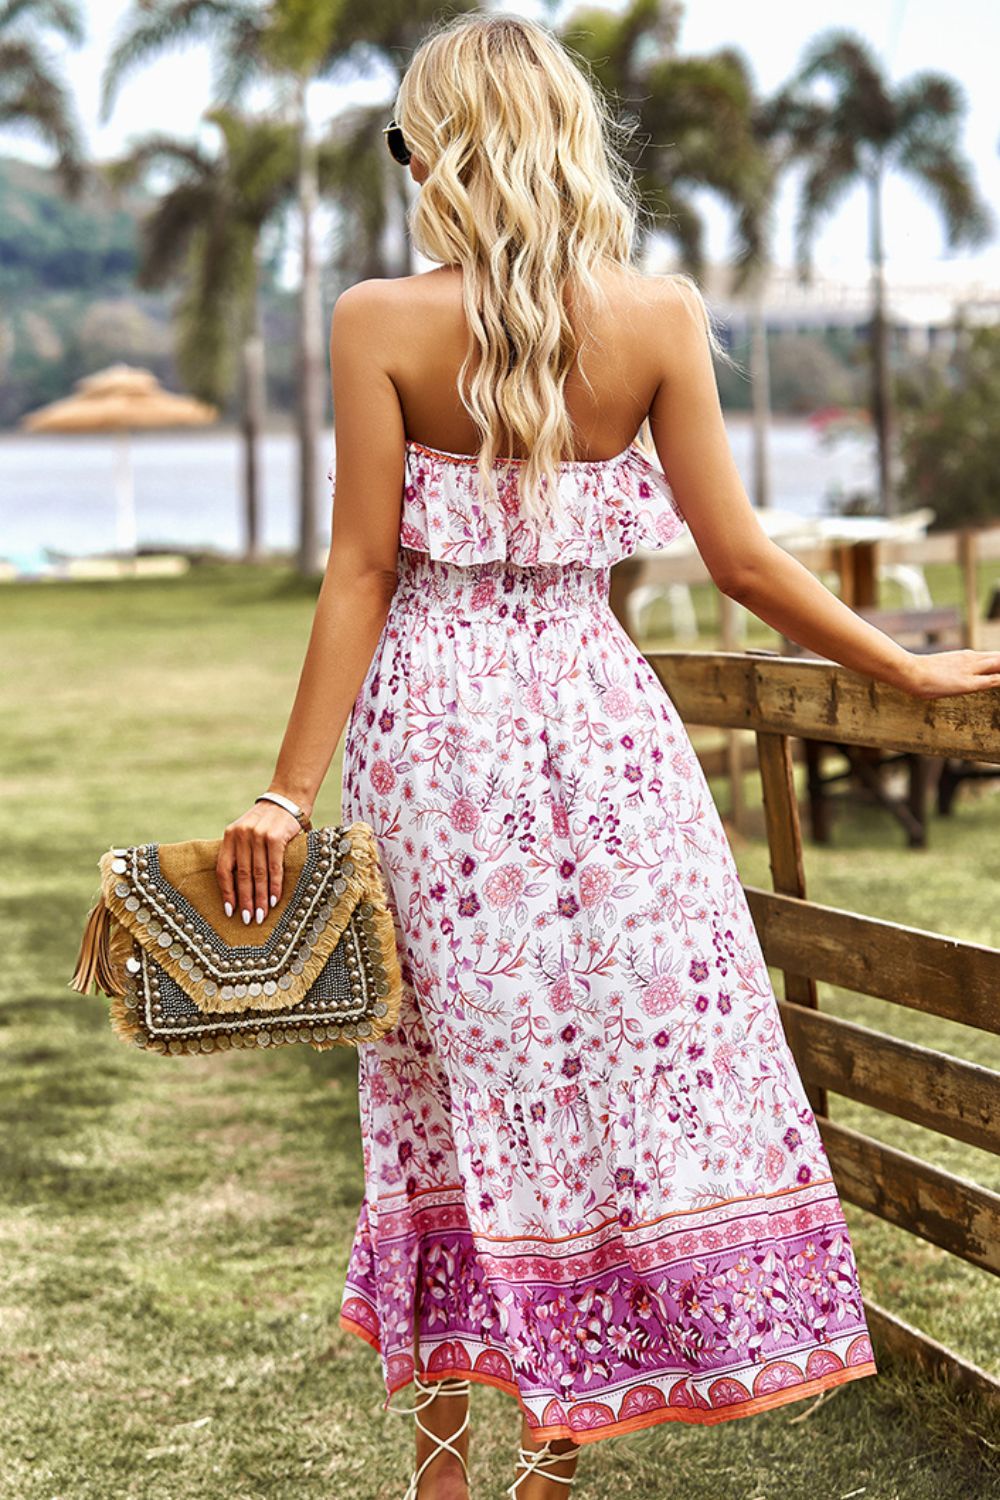 Bohemian Strapless Midi Dress with Slit - Summer Beach Wedding Guest Outfit for Women